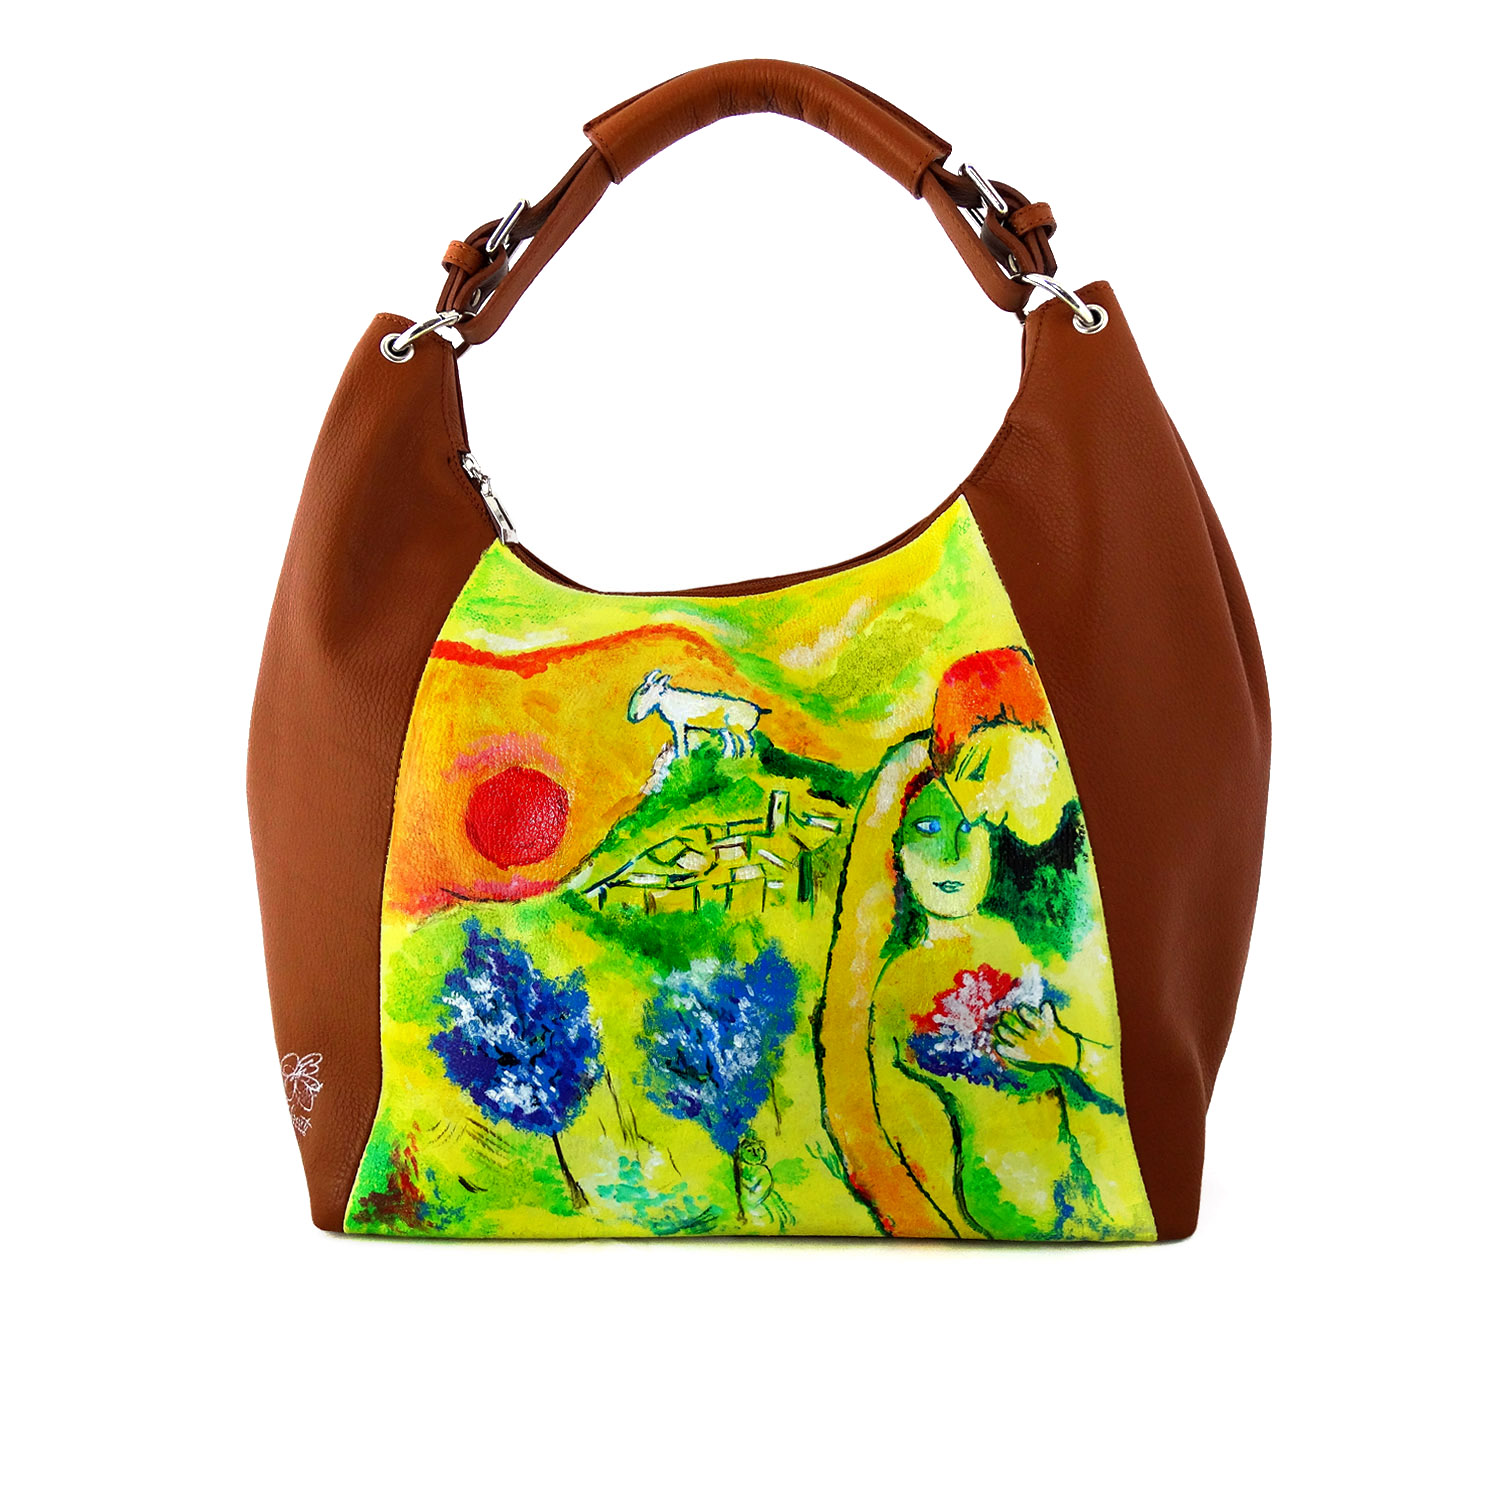 Handpainted bag - The lovers of Vence by Chagall